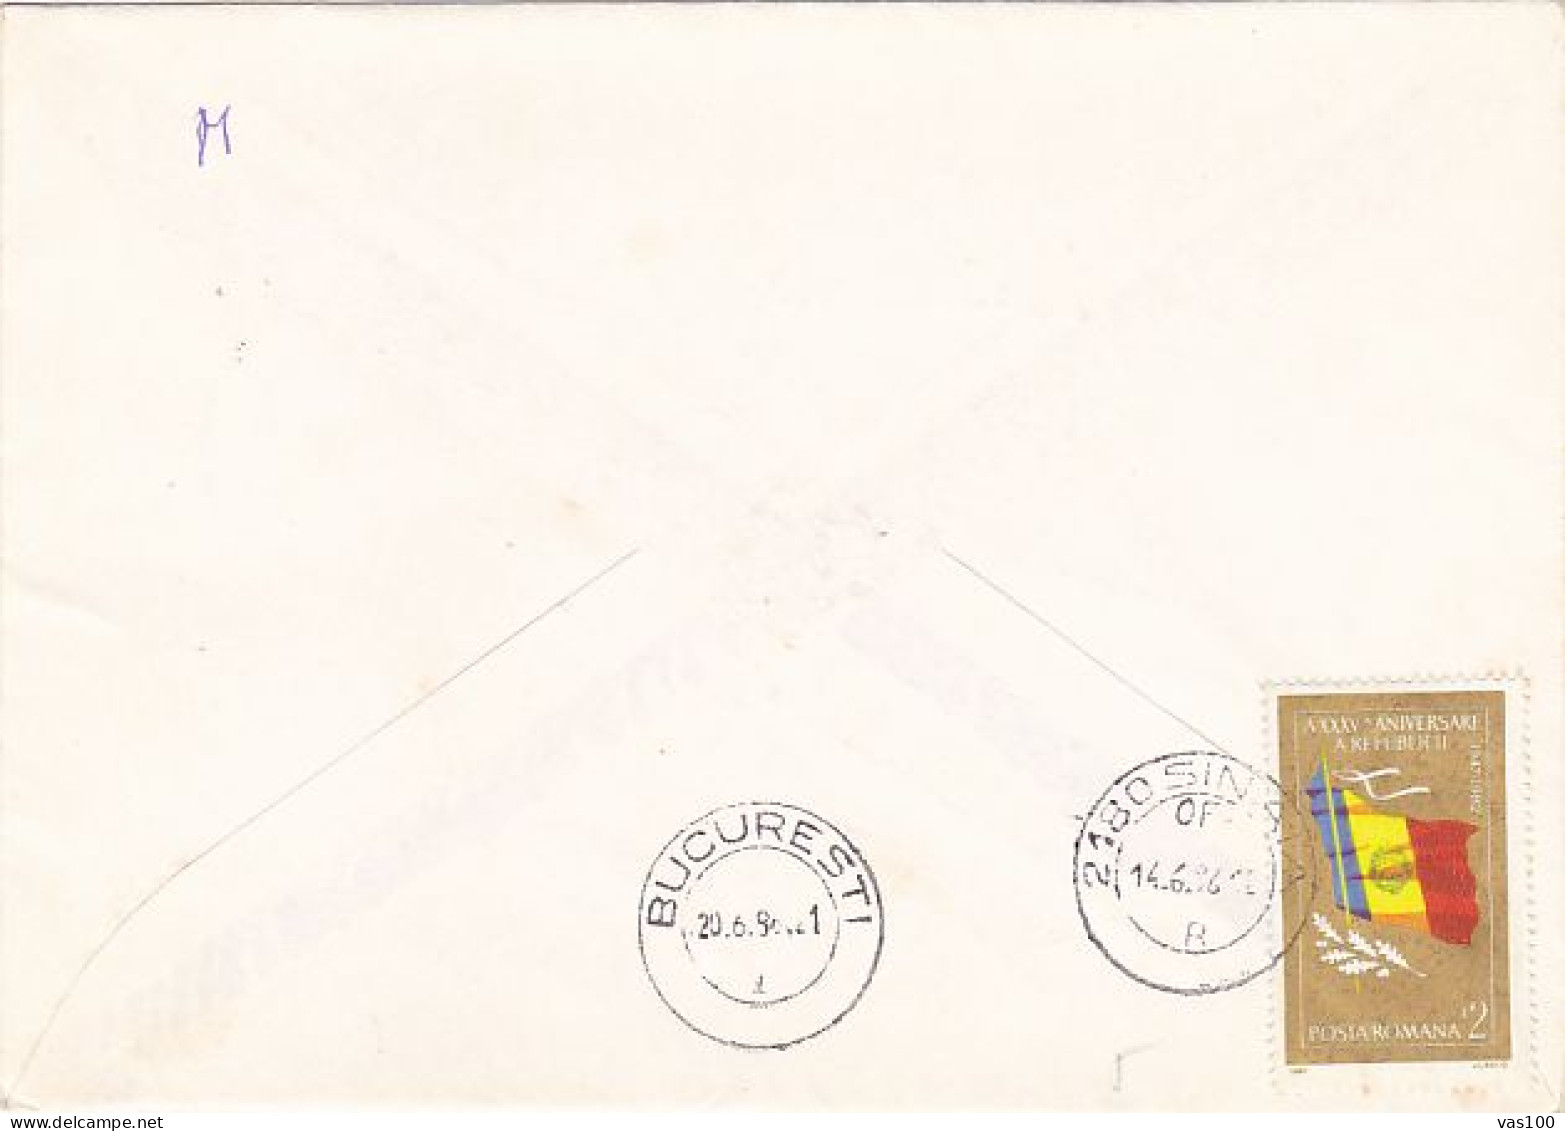 SPORTS, CLIMBING, SKIING, BOBSLED, MOUNTAIN SPORTS, SPECIAL COVER, 1986, ROMANIA - Bergsteigen